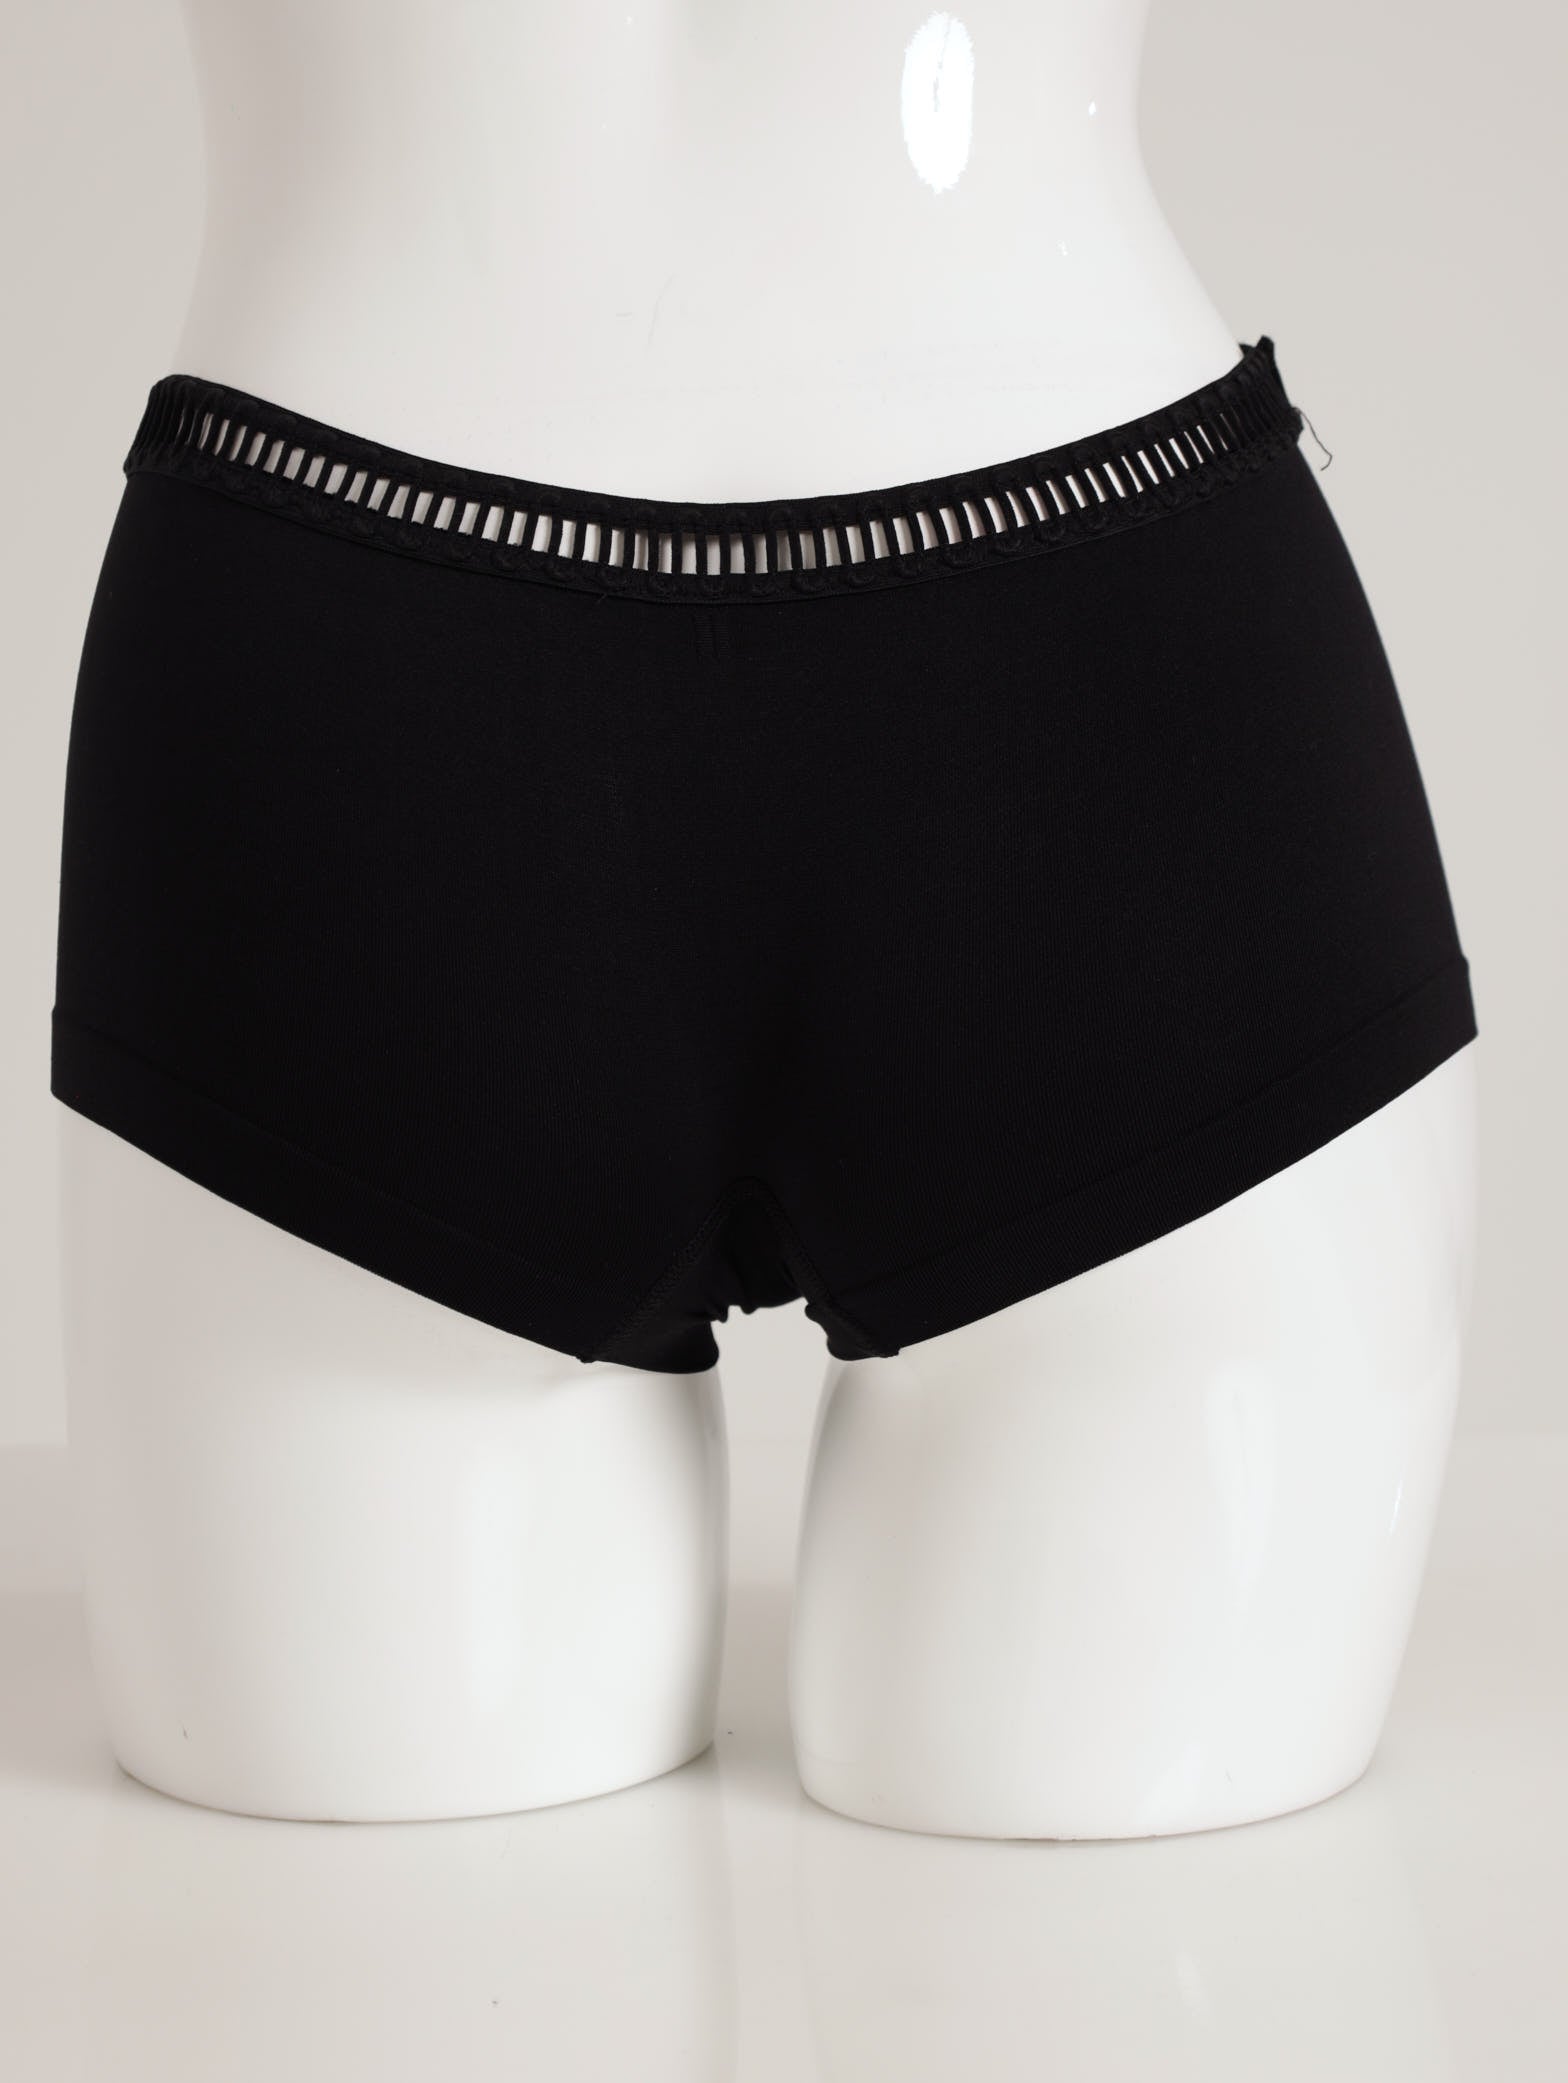 Seamless boyleg panty with light support - Black. Colour: black. Size: s/m